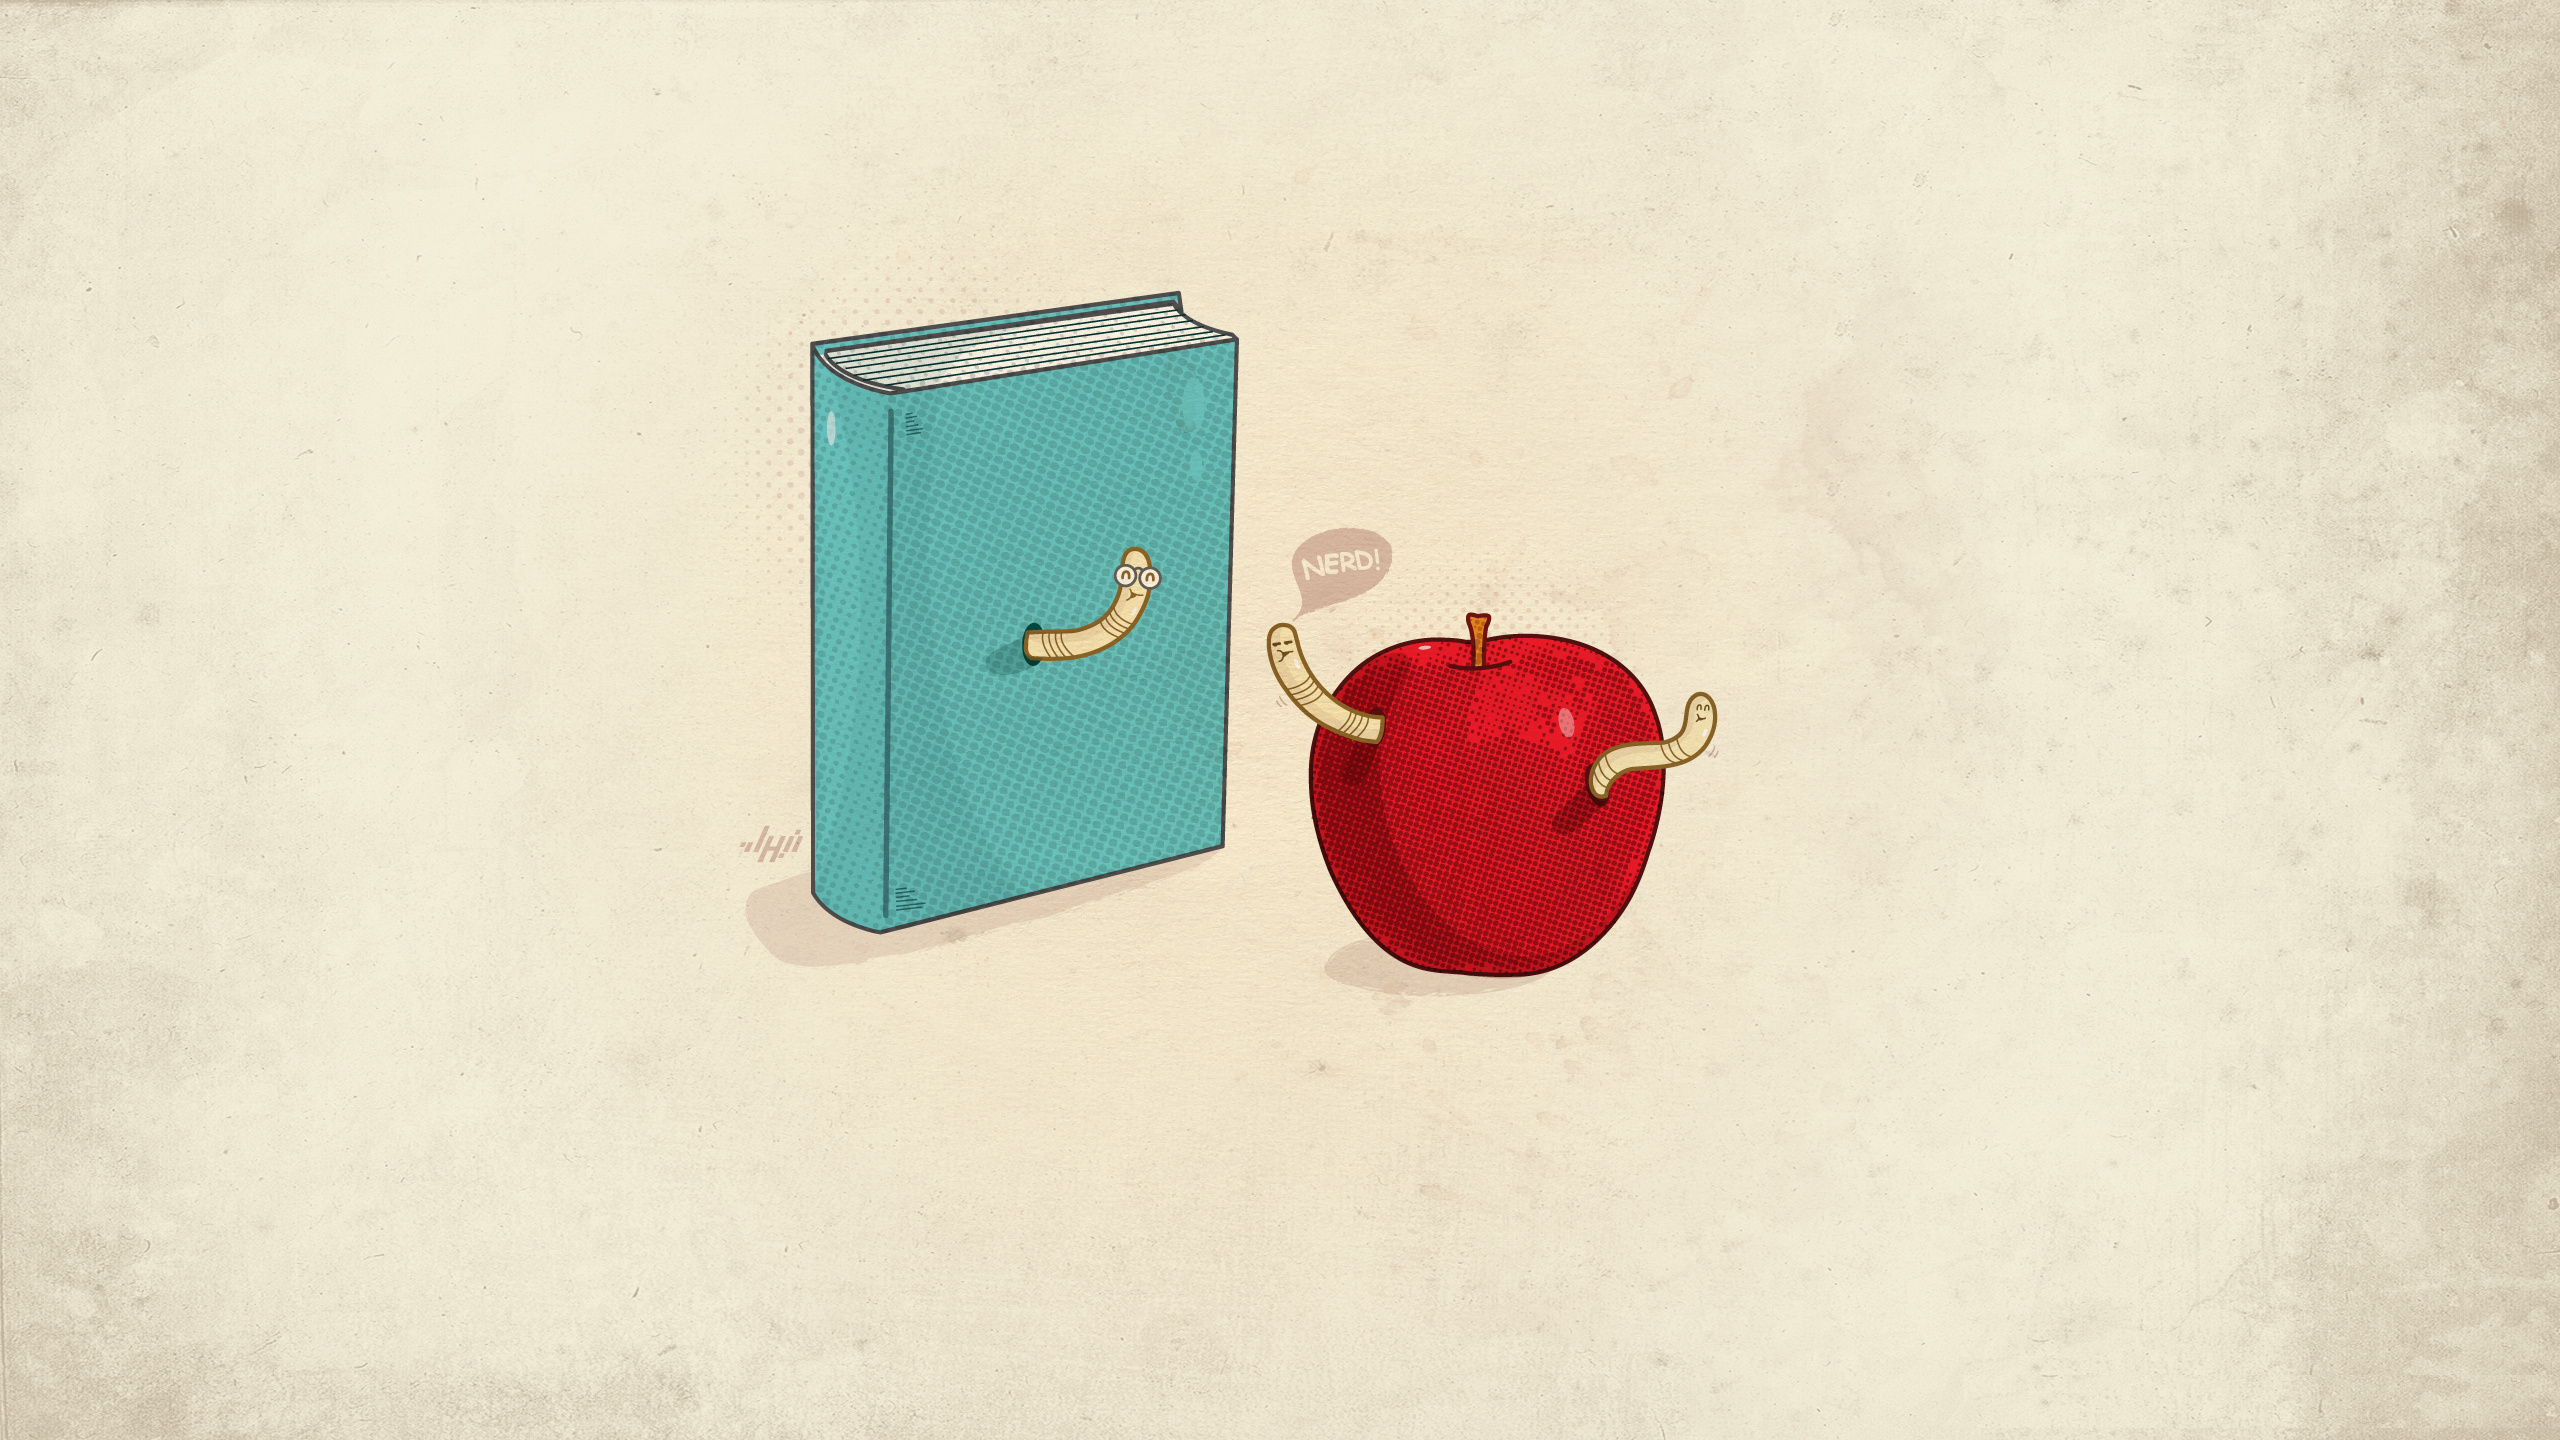 New Lock Screen Wallpapers funny, books, apples, pictures, yellow